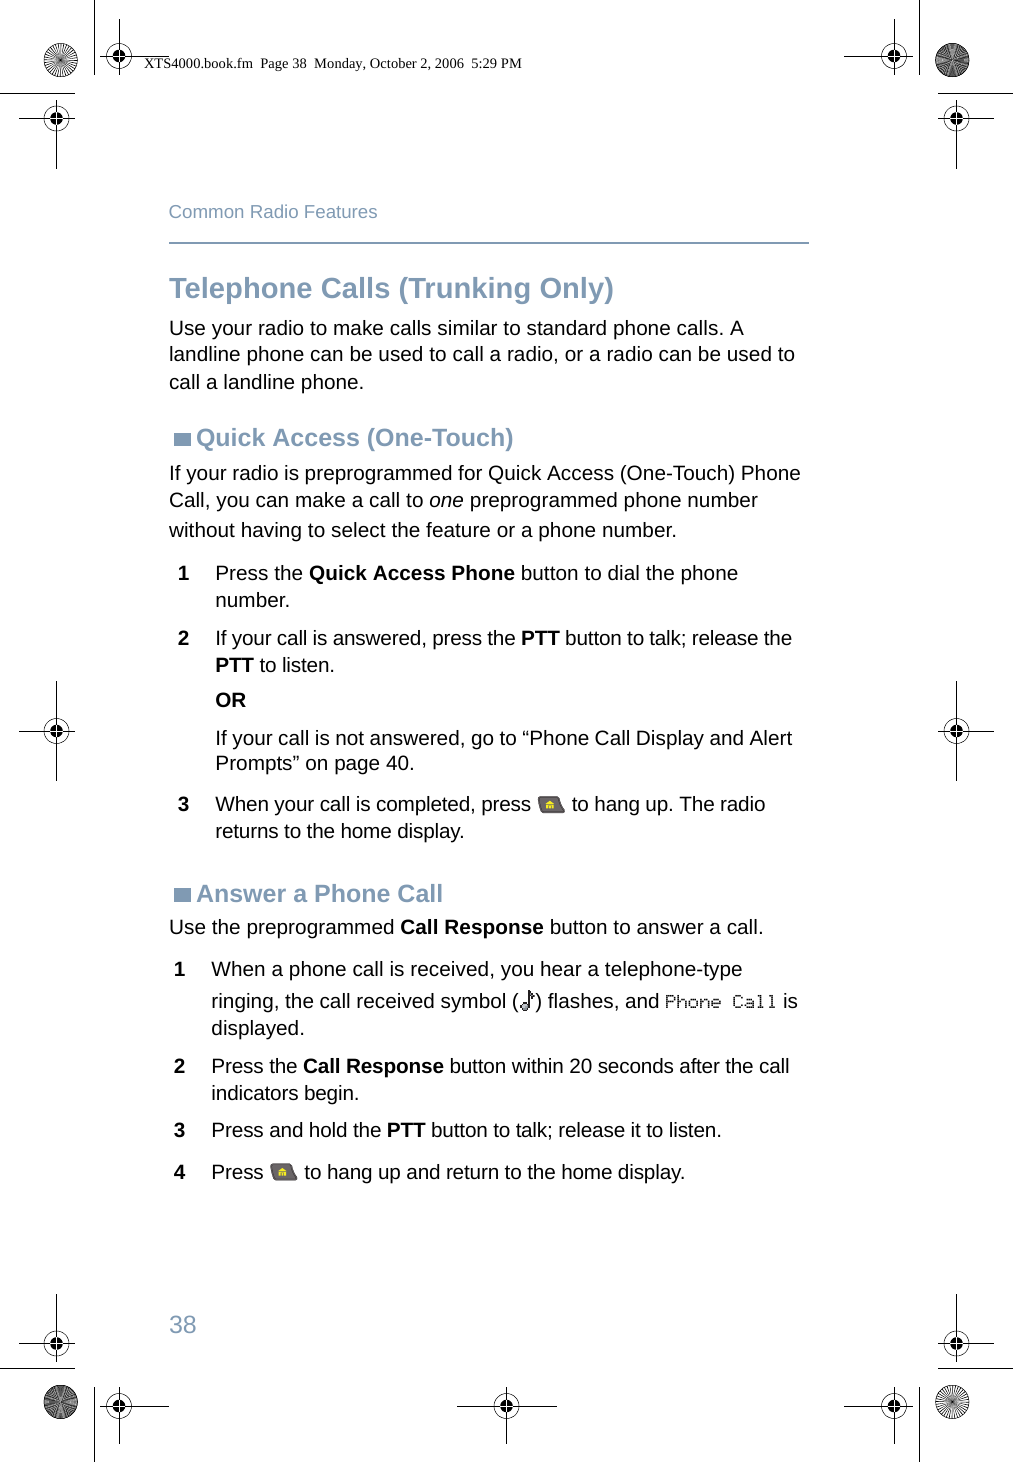 38Common Radio FeaturesTelephone Calls (Trunking Only)Use your radio to make calls similar to standard phone calls. A landline phone can be used to call a radio, or a radio can be used to call a landline phone.Quick Access (One-Touch)If your radio is preprogrammed for Quick Access (One-Touch) Phone Call, you can make a call to one preprogrammed phone number without having to select the feature or a phone number. Answer a Phone CallUse the preprogrammed Call Response button to answer a call.1Press the Quick Access Phone button to dial the phone number.2If your call is answered, press the PTT button to talk; release the PTT to listen.ORIf your call is not answered, go to “Phone Call Display and Alert Prompts” on page 40.3When your call is completed, press   to hang up. The radio returns to the home display.1When a phone call is received, you hear a telephone-type ringing, the call received symbol ( ) flashes, and Phone Call is displayed.2Press the Call Response button within 20 seconds after the call indicators begin.3Press and hold the PTT button to talk; release it to listen.4Press   to hang up and return to the home display.XTS4000.book.fm  Page 38  Monday, October 2, 2006  5:29 PM